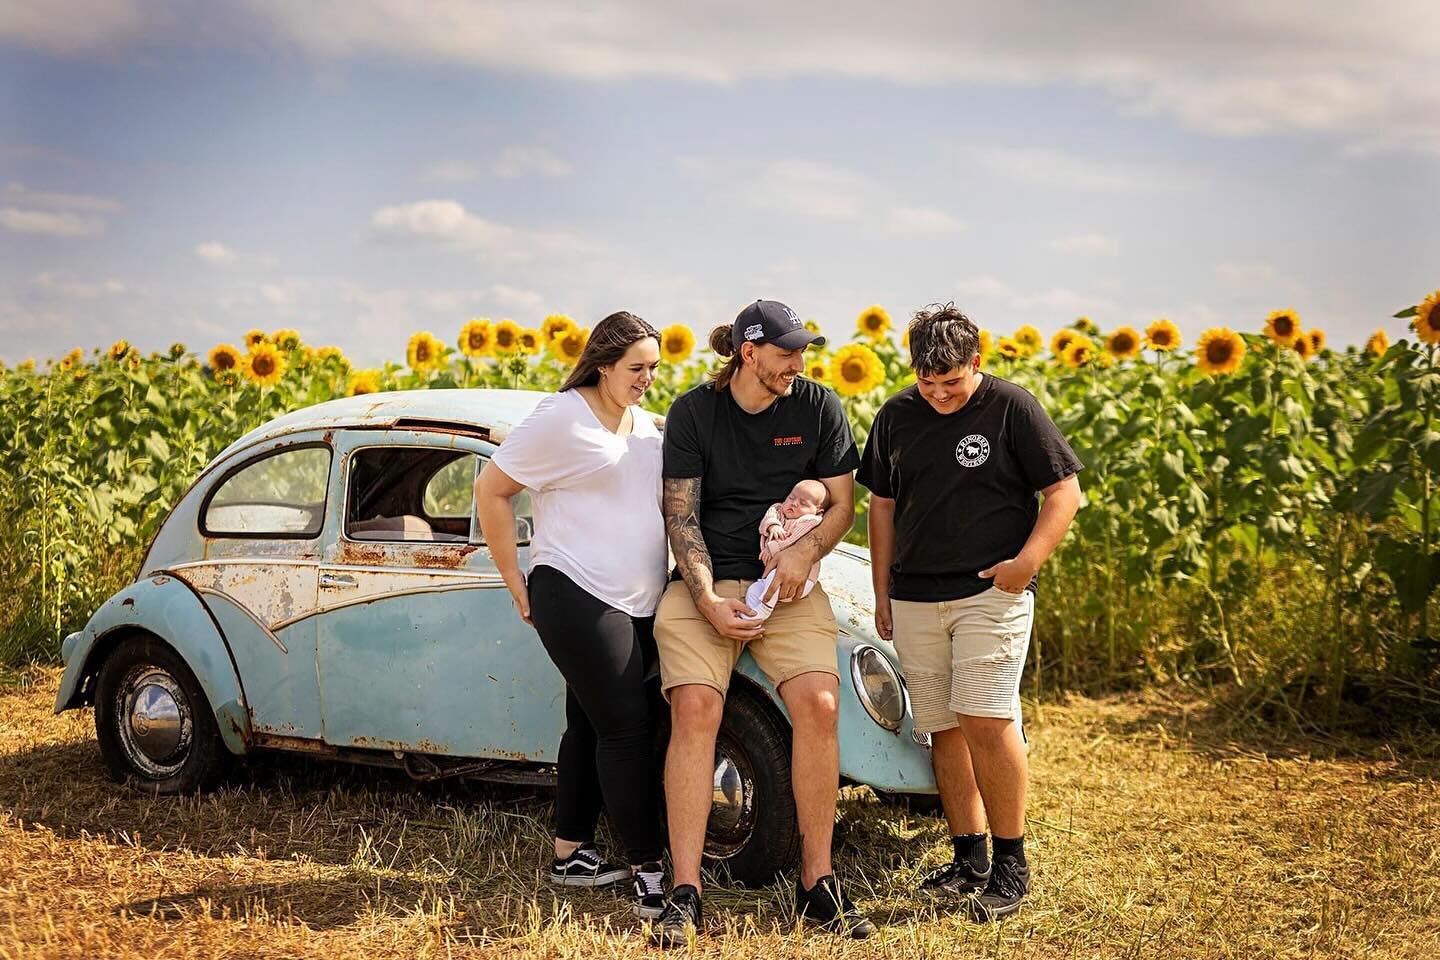 Looking for something to do this long weekend that is low cost and the kids will love? We visited the Hunter Valley Sunflowers at Largs yesterday afternoon and it was just beautiful. All of the hidden objects throughout the flowers made the exploring